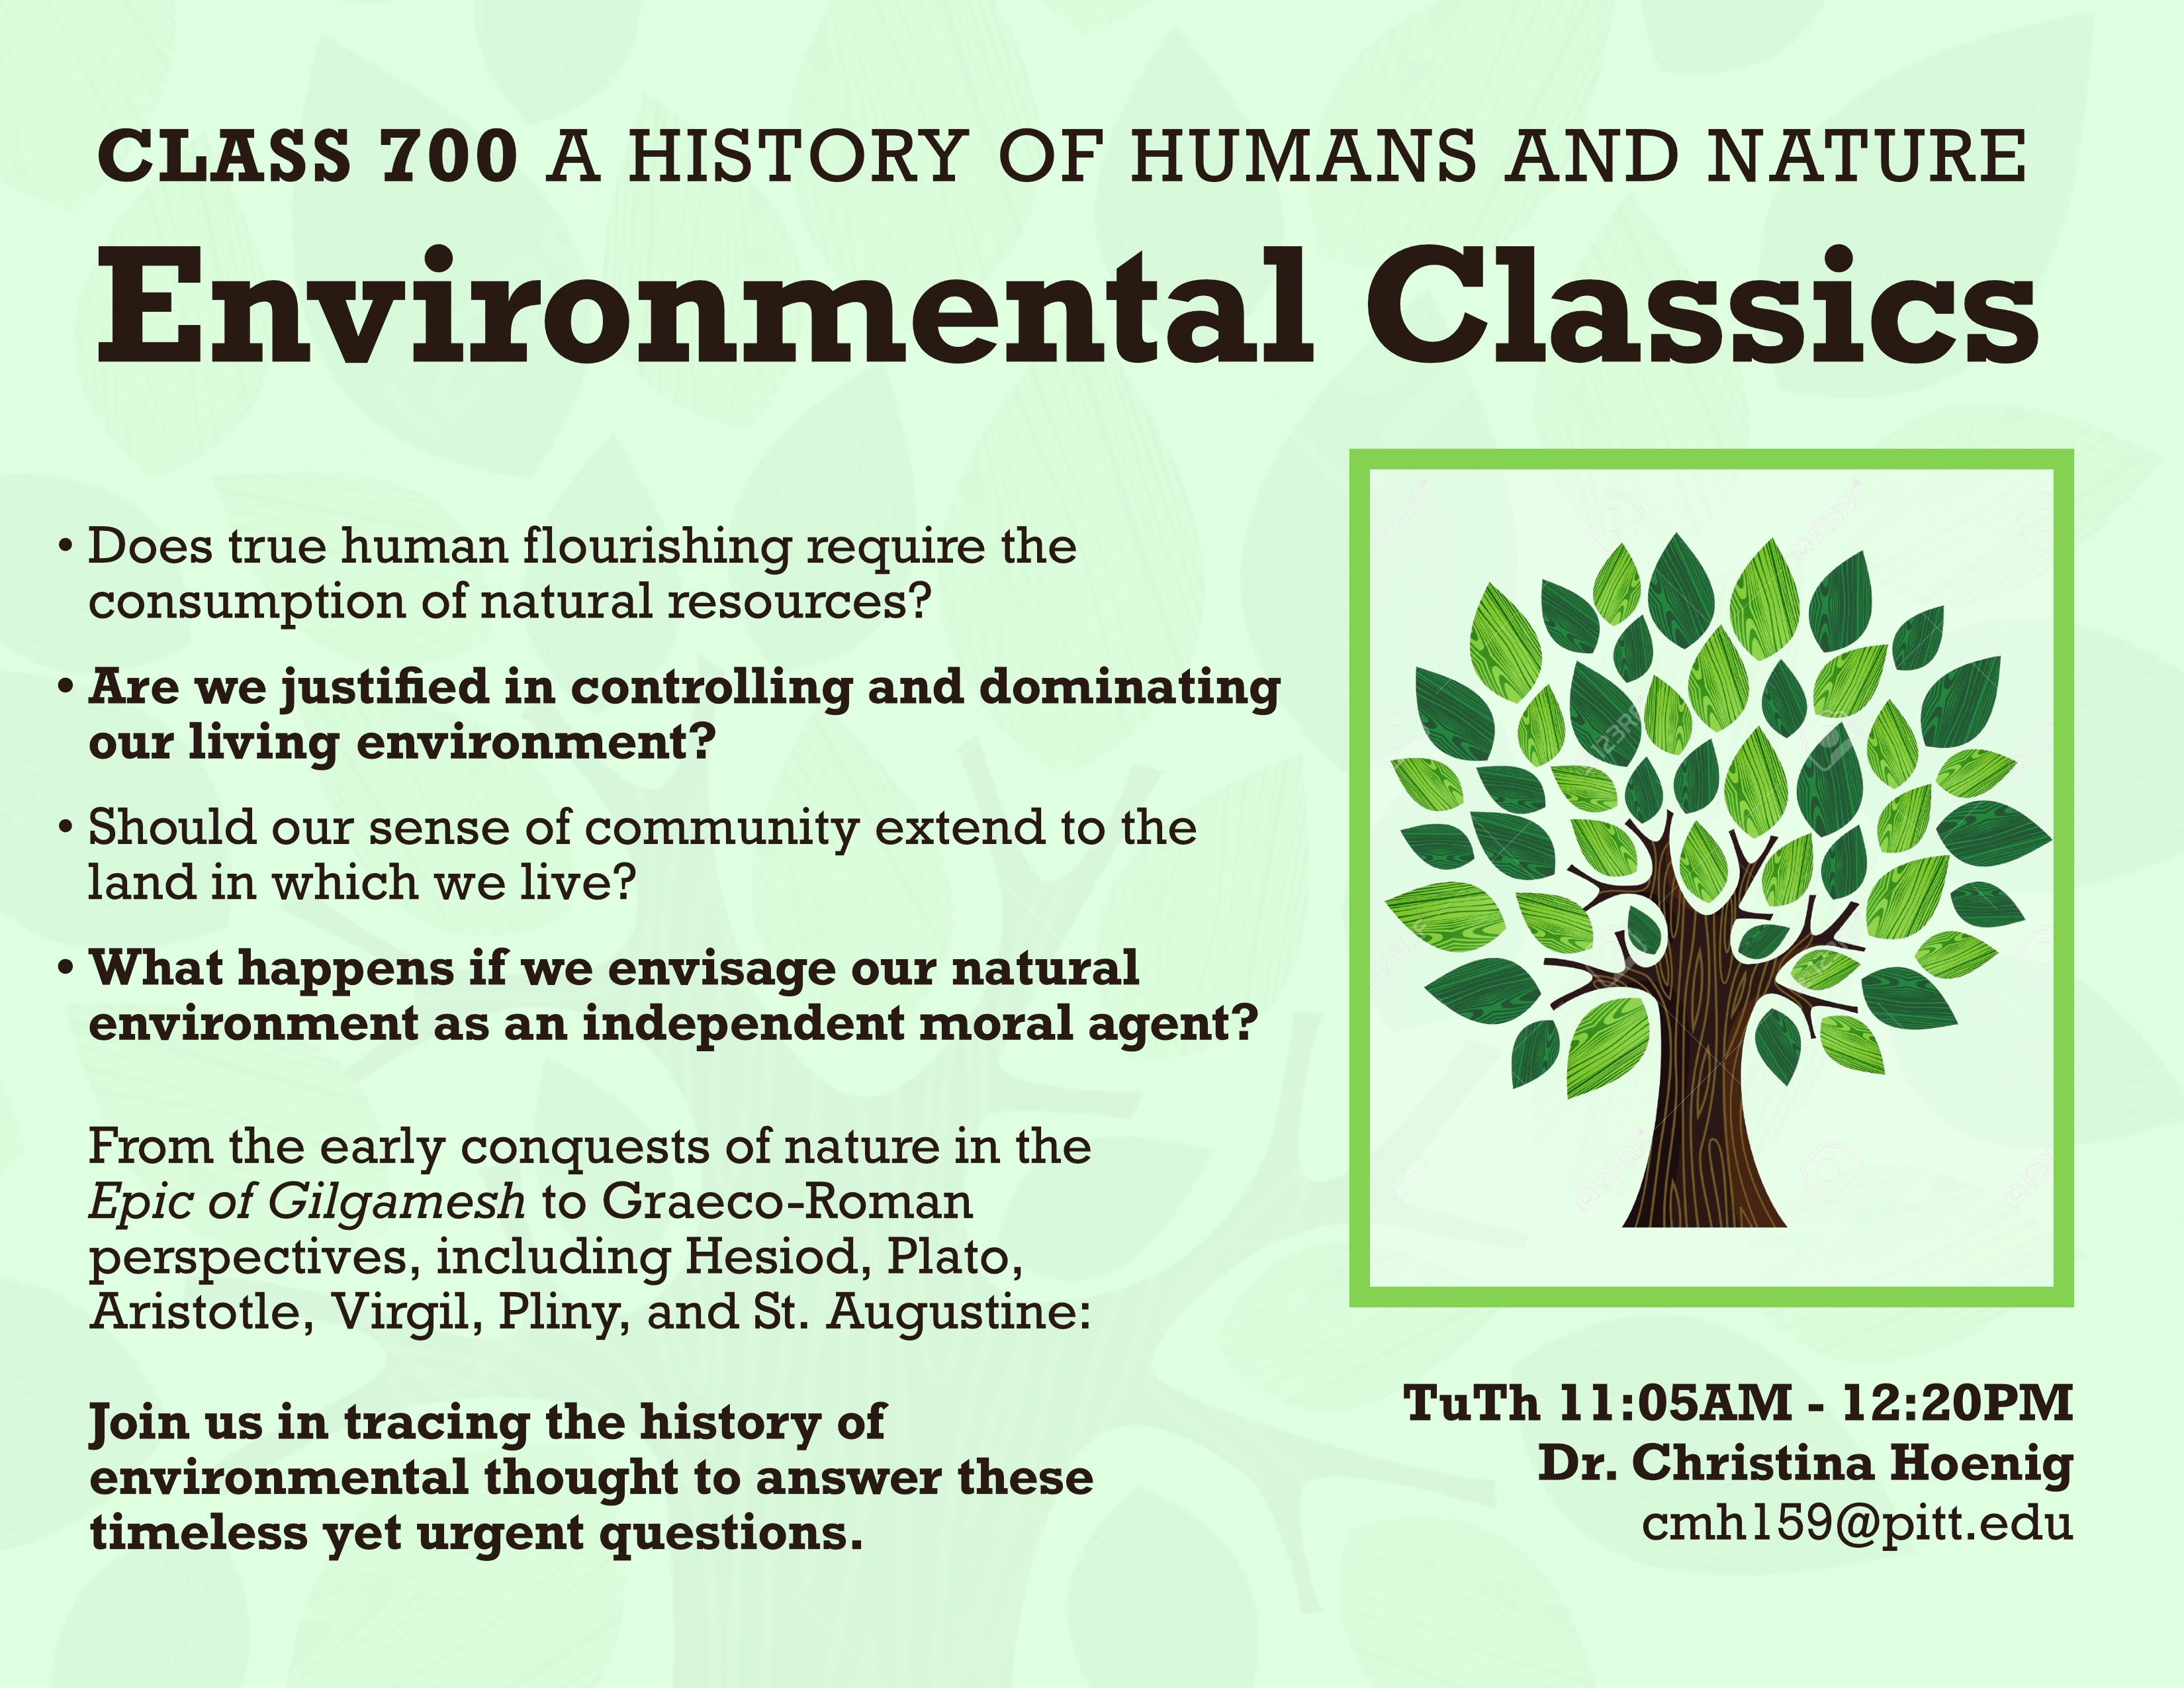 This flyer has a green background and depicts a dark-green tree with a light-green border. CLASS 700 A History of Humans and Nature: Environmental Classics. Does true human flourishing require consumption of natural resources? Are we justified in controlling and dominating our living environment? Should our sense of community extend to the land in which we live? What happens if we envisage our natural environment as an independent moral agent? From the early conquests of nature in the Epic of Gilgamesh to Graeco-Roman perspectives, including Hesiod, Plato, Aristotle, Virgil, Pliny, and St. Augustine: Join us in tracing the history of the environmental thought to answer these timeless yet urgent questions.